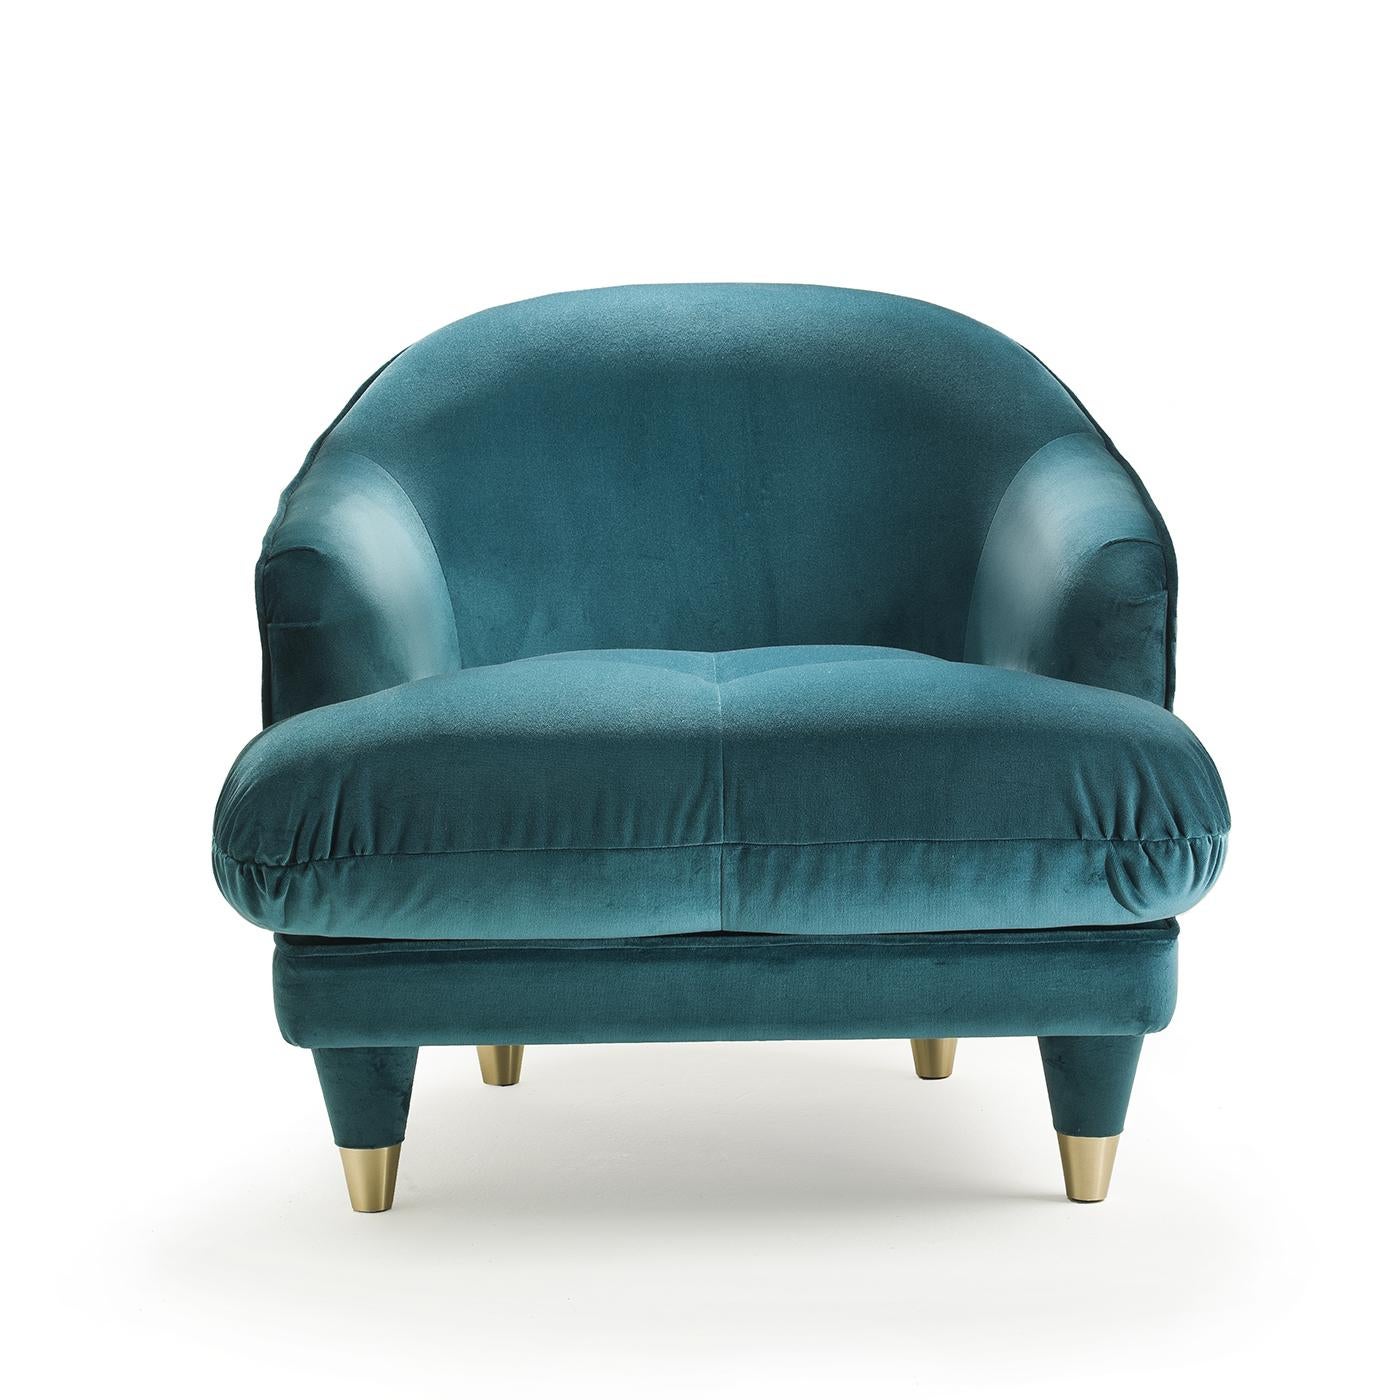 The generous curves and comfortable pillows of this stunning club armchair make it a superb addition to a classic living room or modern private study. The plush cushion of the quilted seat, 50 cm in height, rests on small tapered legs with